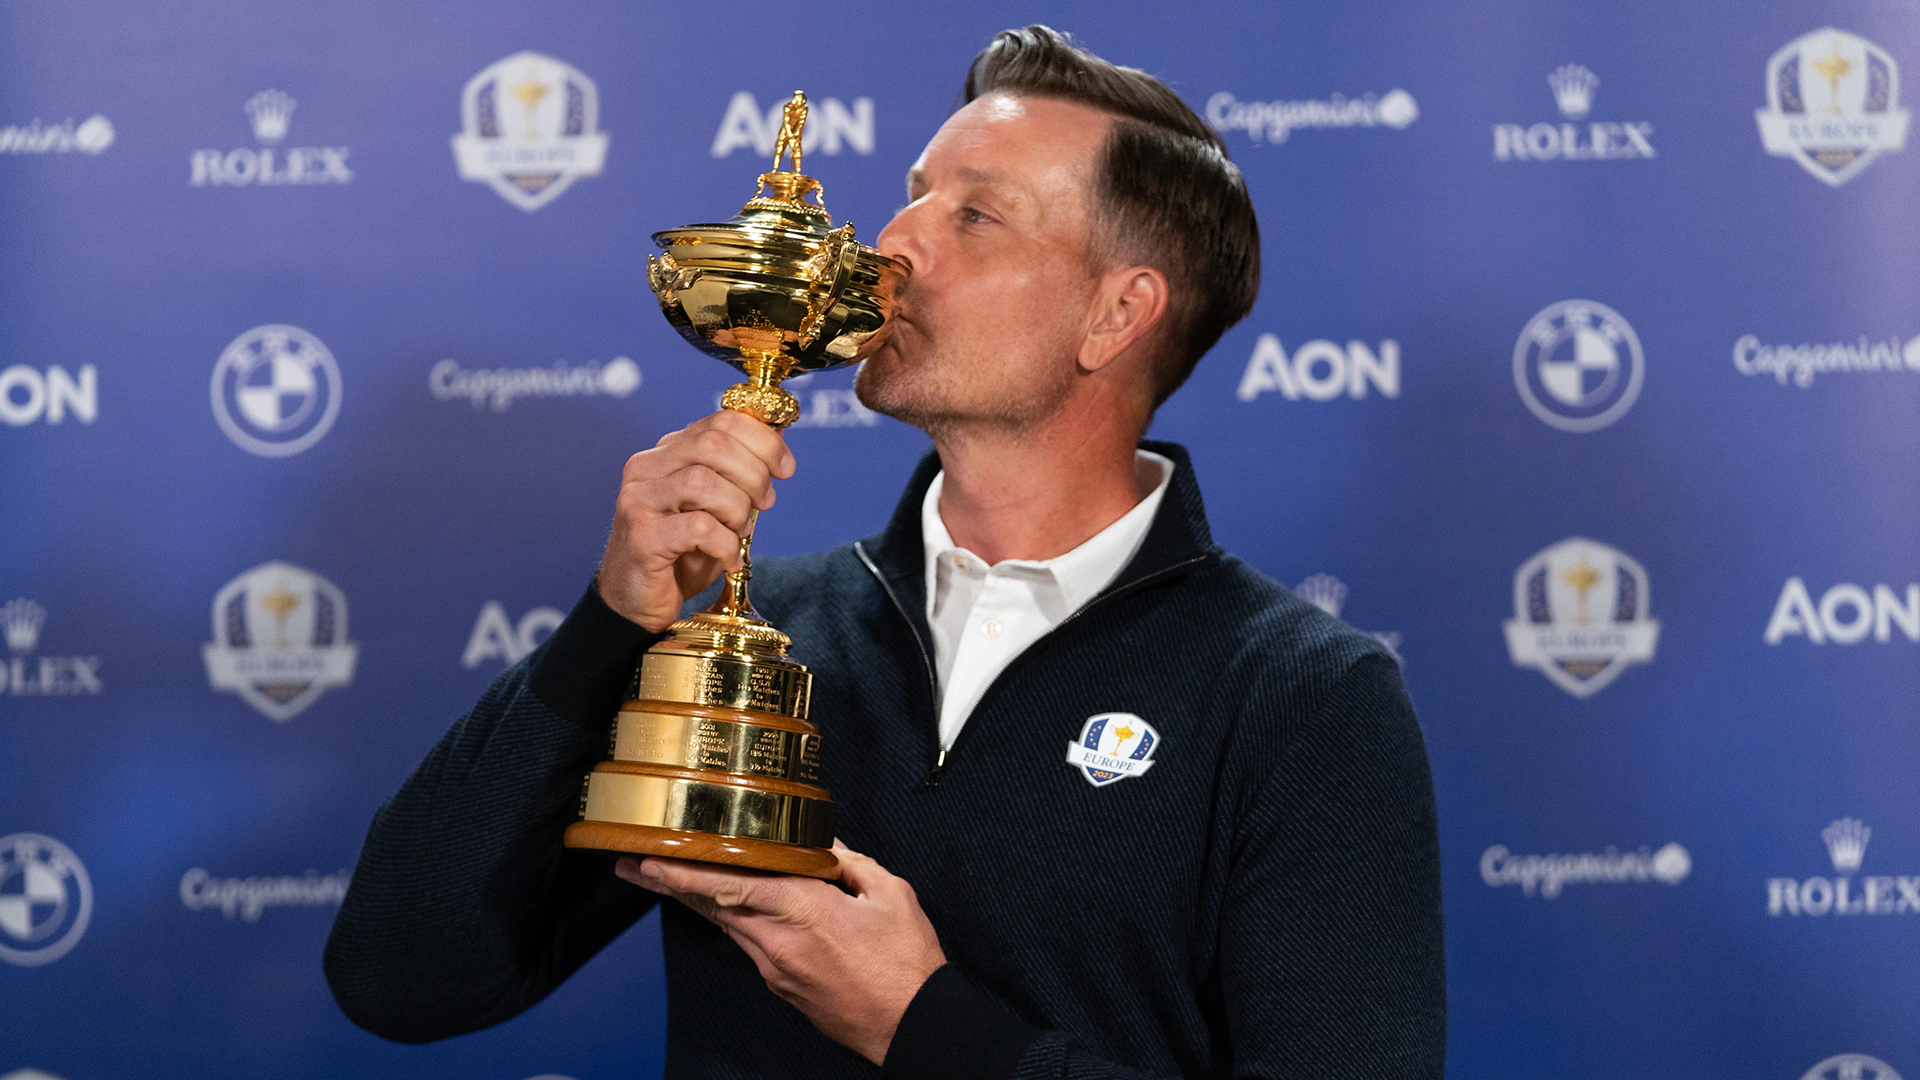 Henrik Stenson’s tenure as European Ryder Cup captain ‘brought to an end’